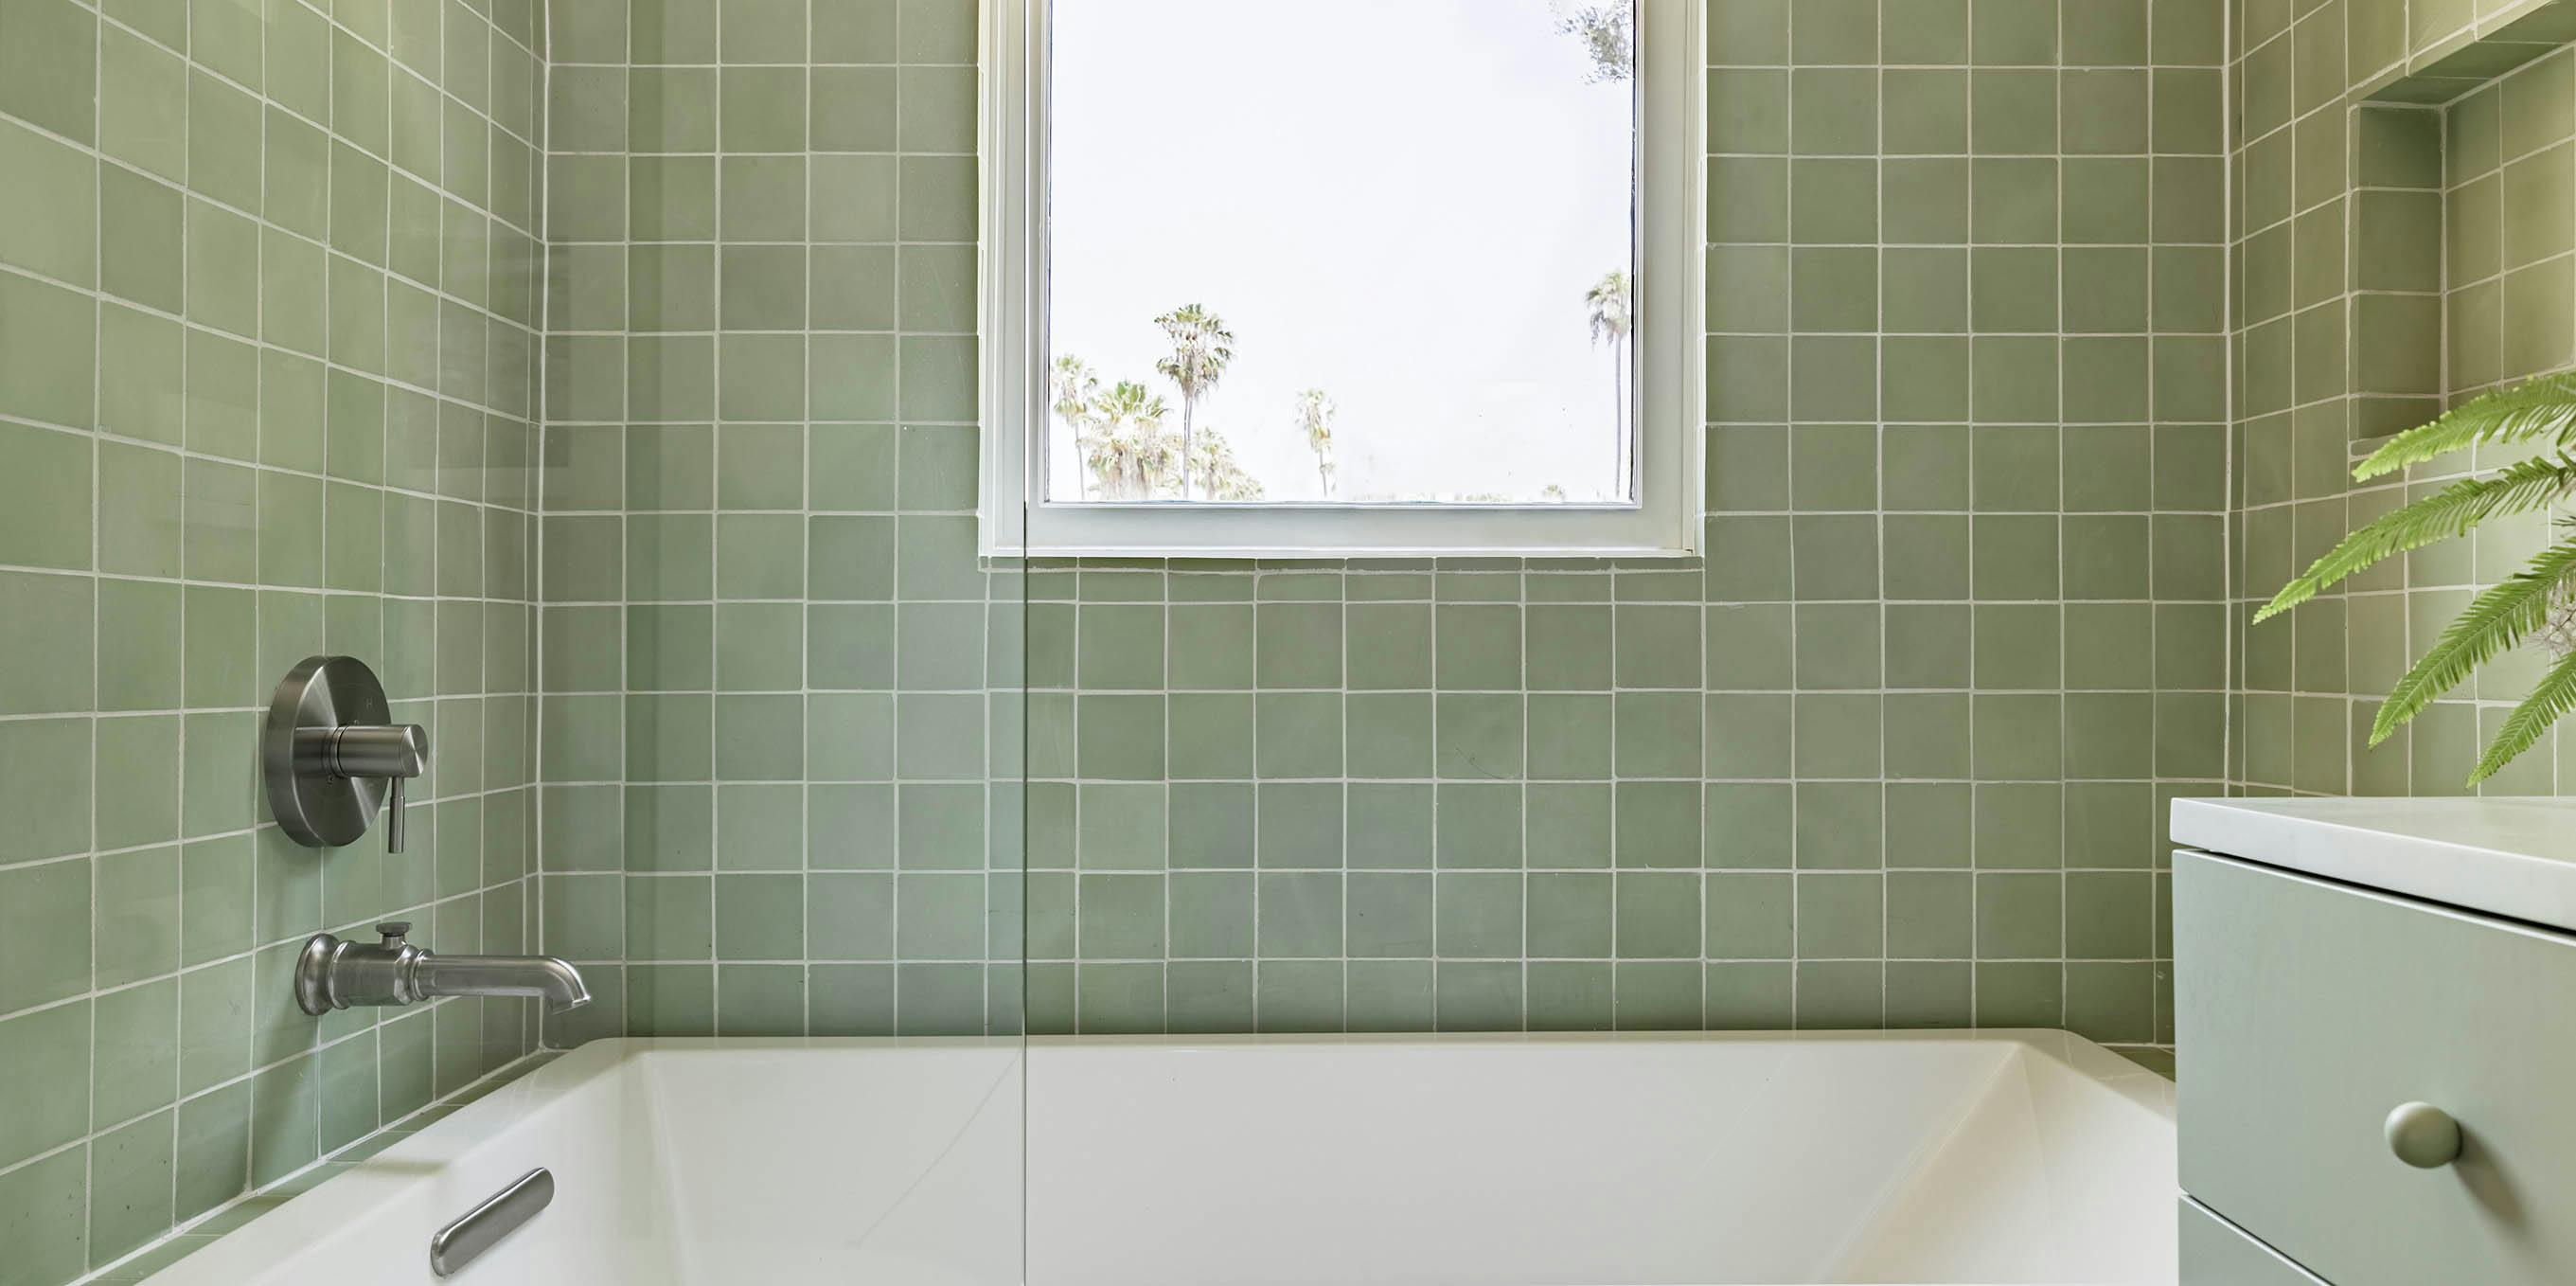 Cement Tile: 4x4 Square Solid collection featured image.